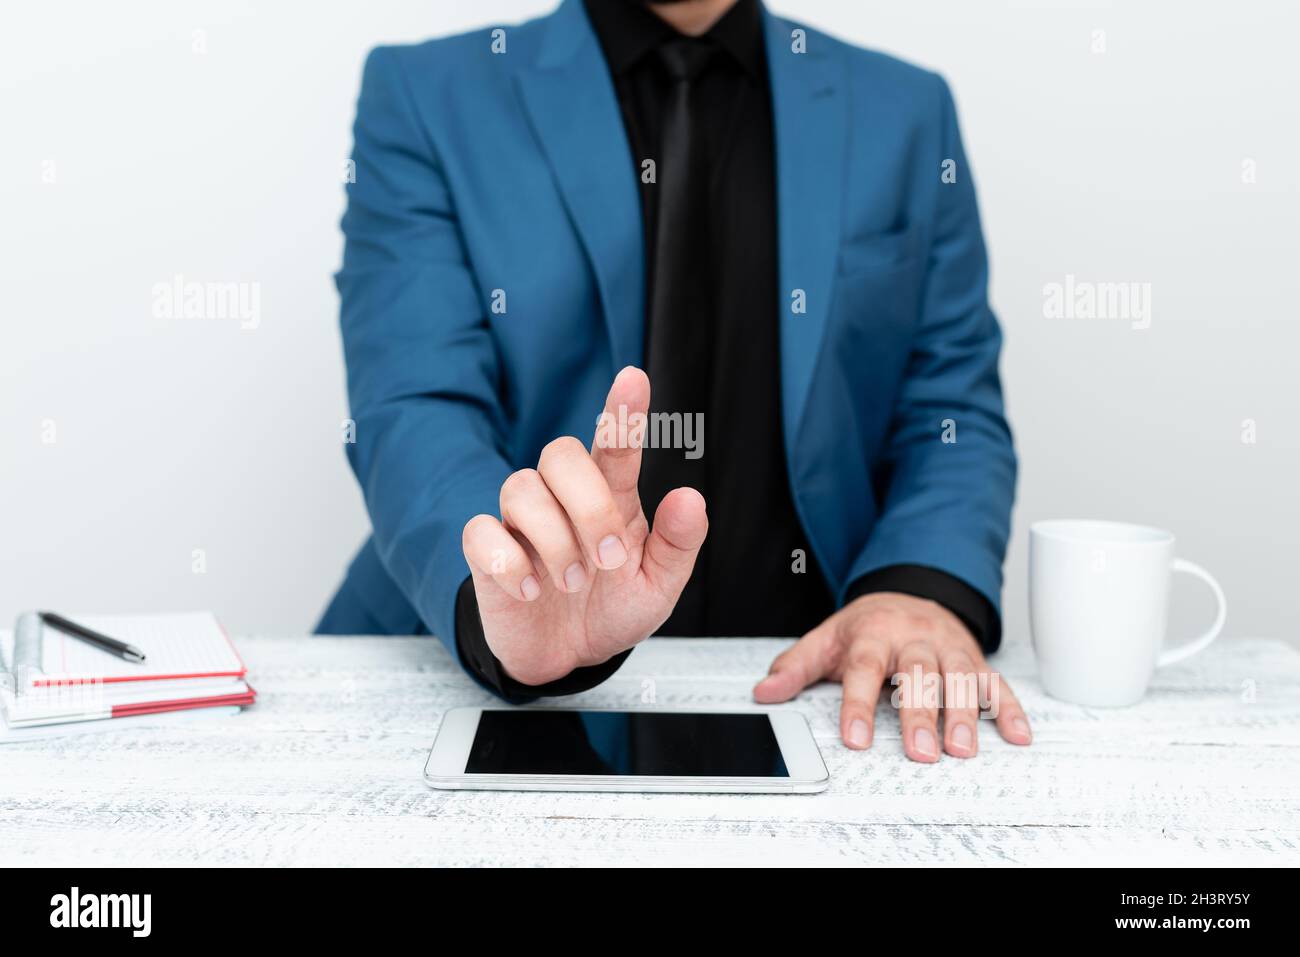 Presenting Communication Technology Smartphone Voice Video Calling Writing Important Notes Job Interview Ideas Global Connectivi Stock Photo